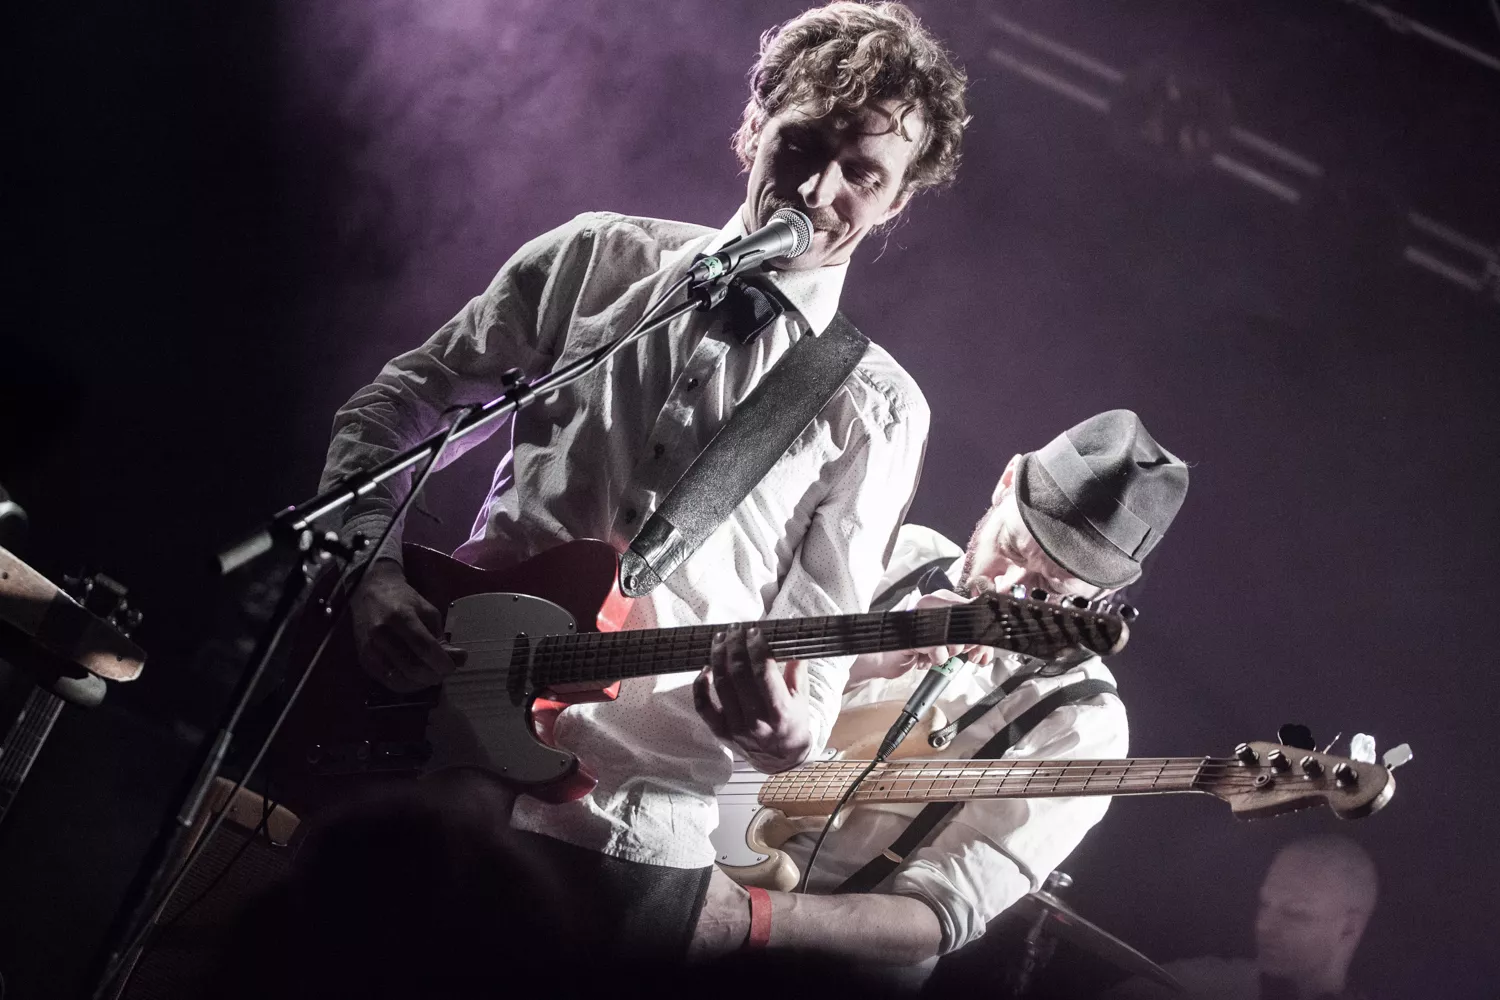 Reportage: Til lyttesession med WhoMadeWho